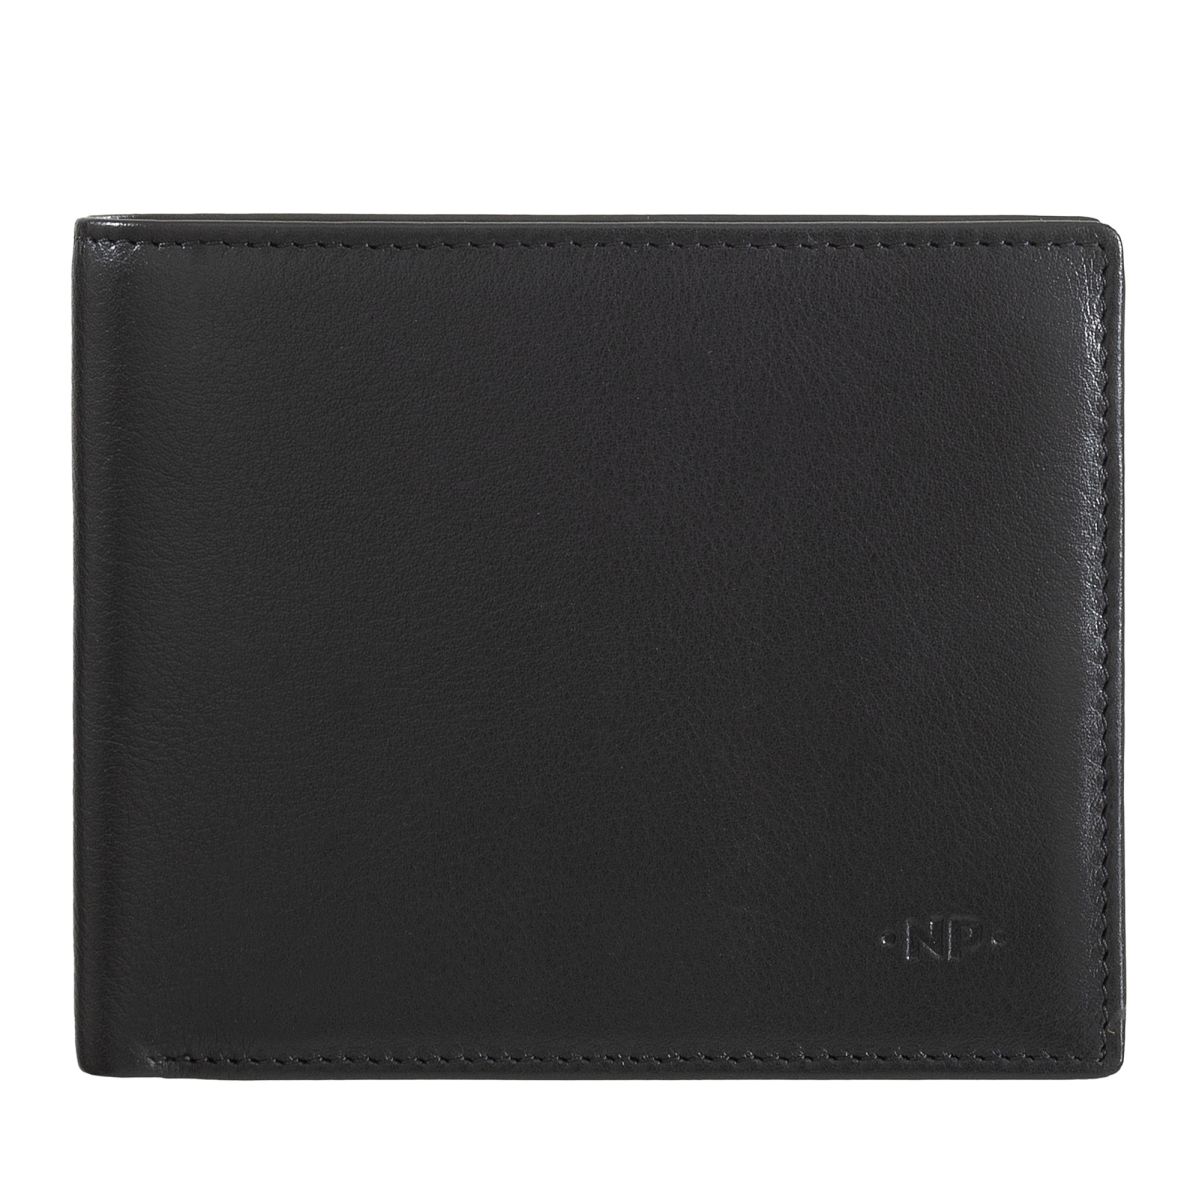 NUVOLA PELLE Slim Leather Wallet With Coin Pocket - Black